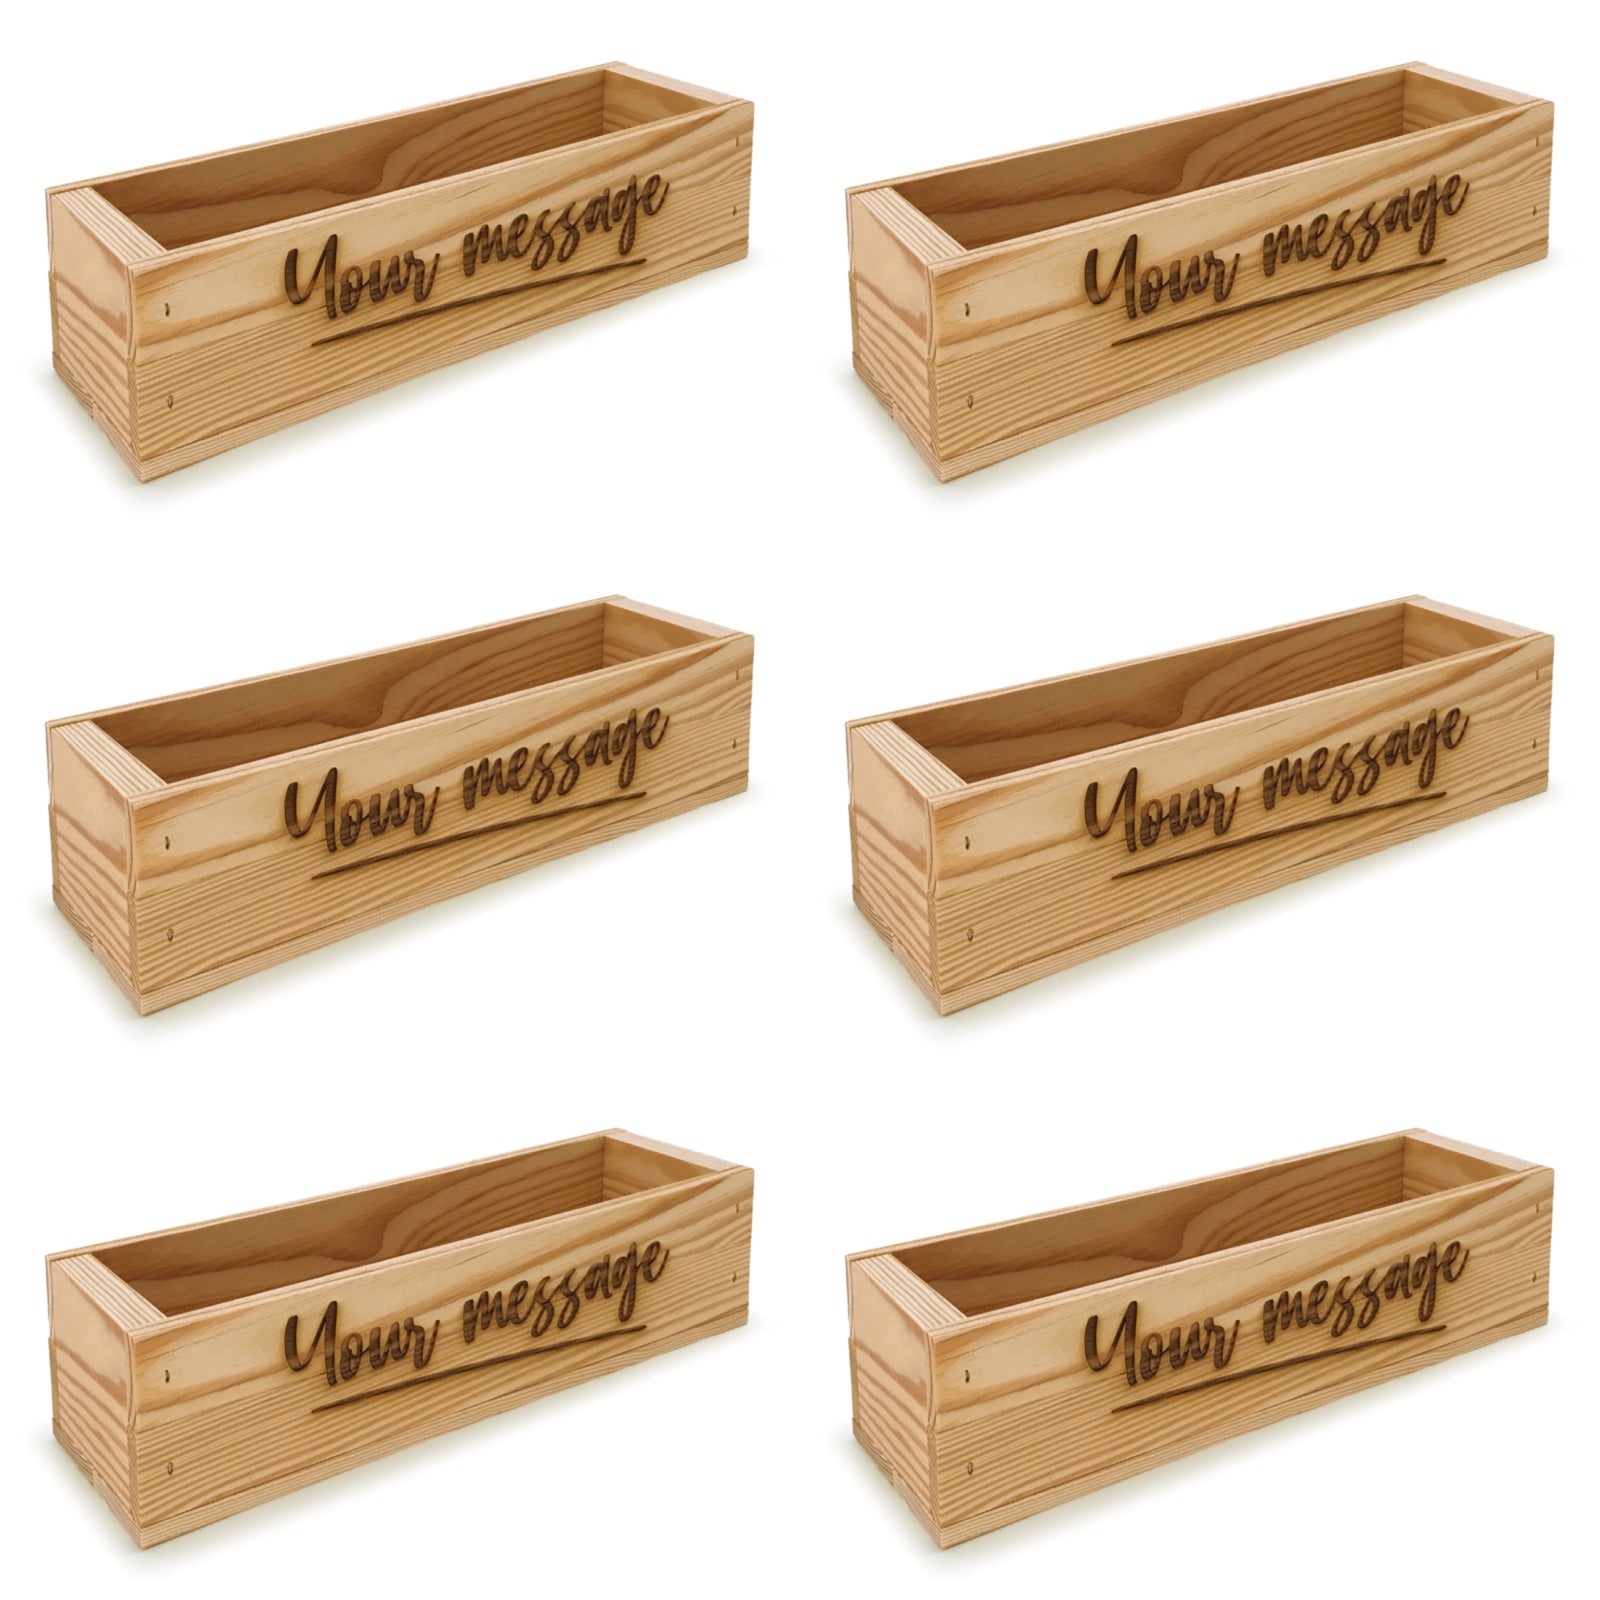 6 Single bottle wine crates with custom message 13x3.5x3.5